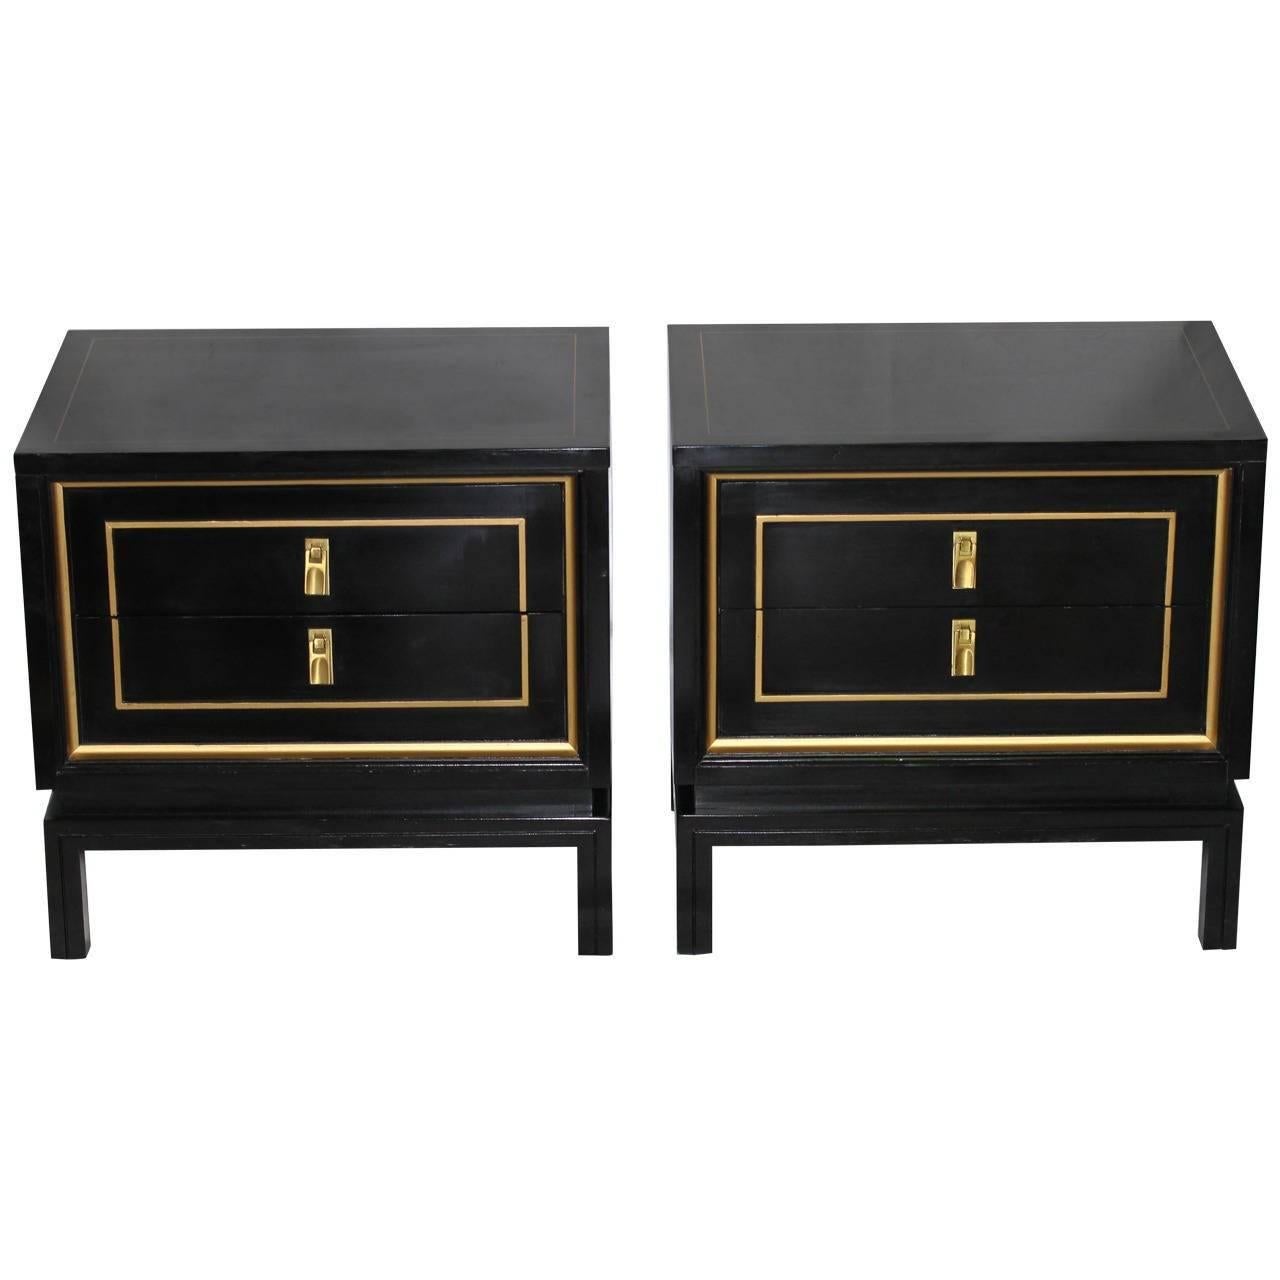 Pair of black lacquered and gold painted detailing night stands or end tables by American of Martinsville. The Dorothy Draper inspired nightstands have attractive brass pulls and two pull-out drawers.